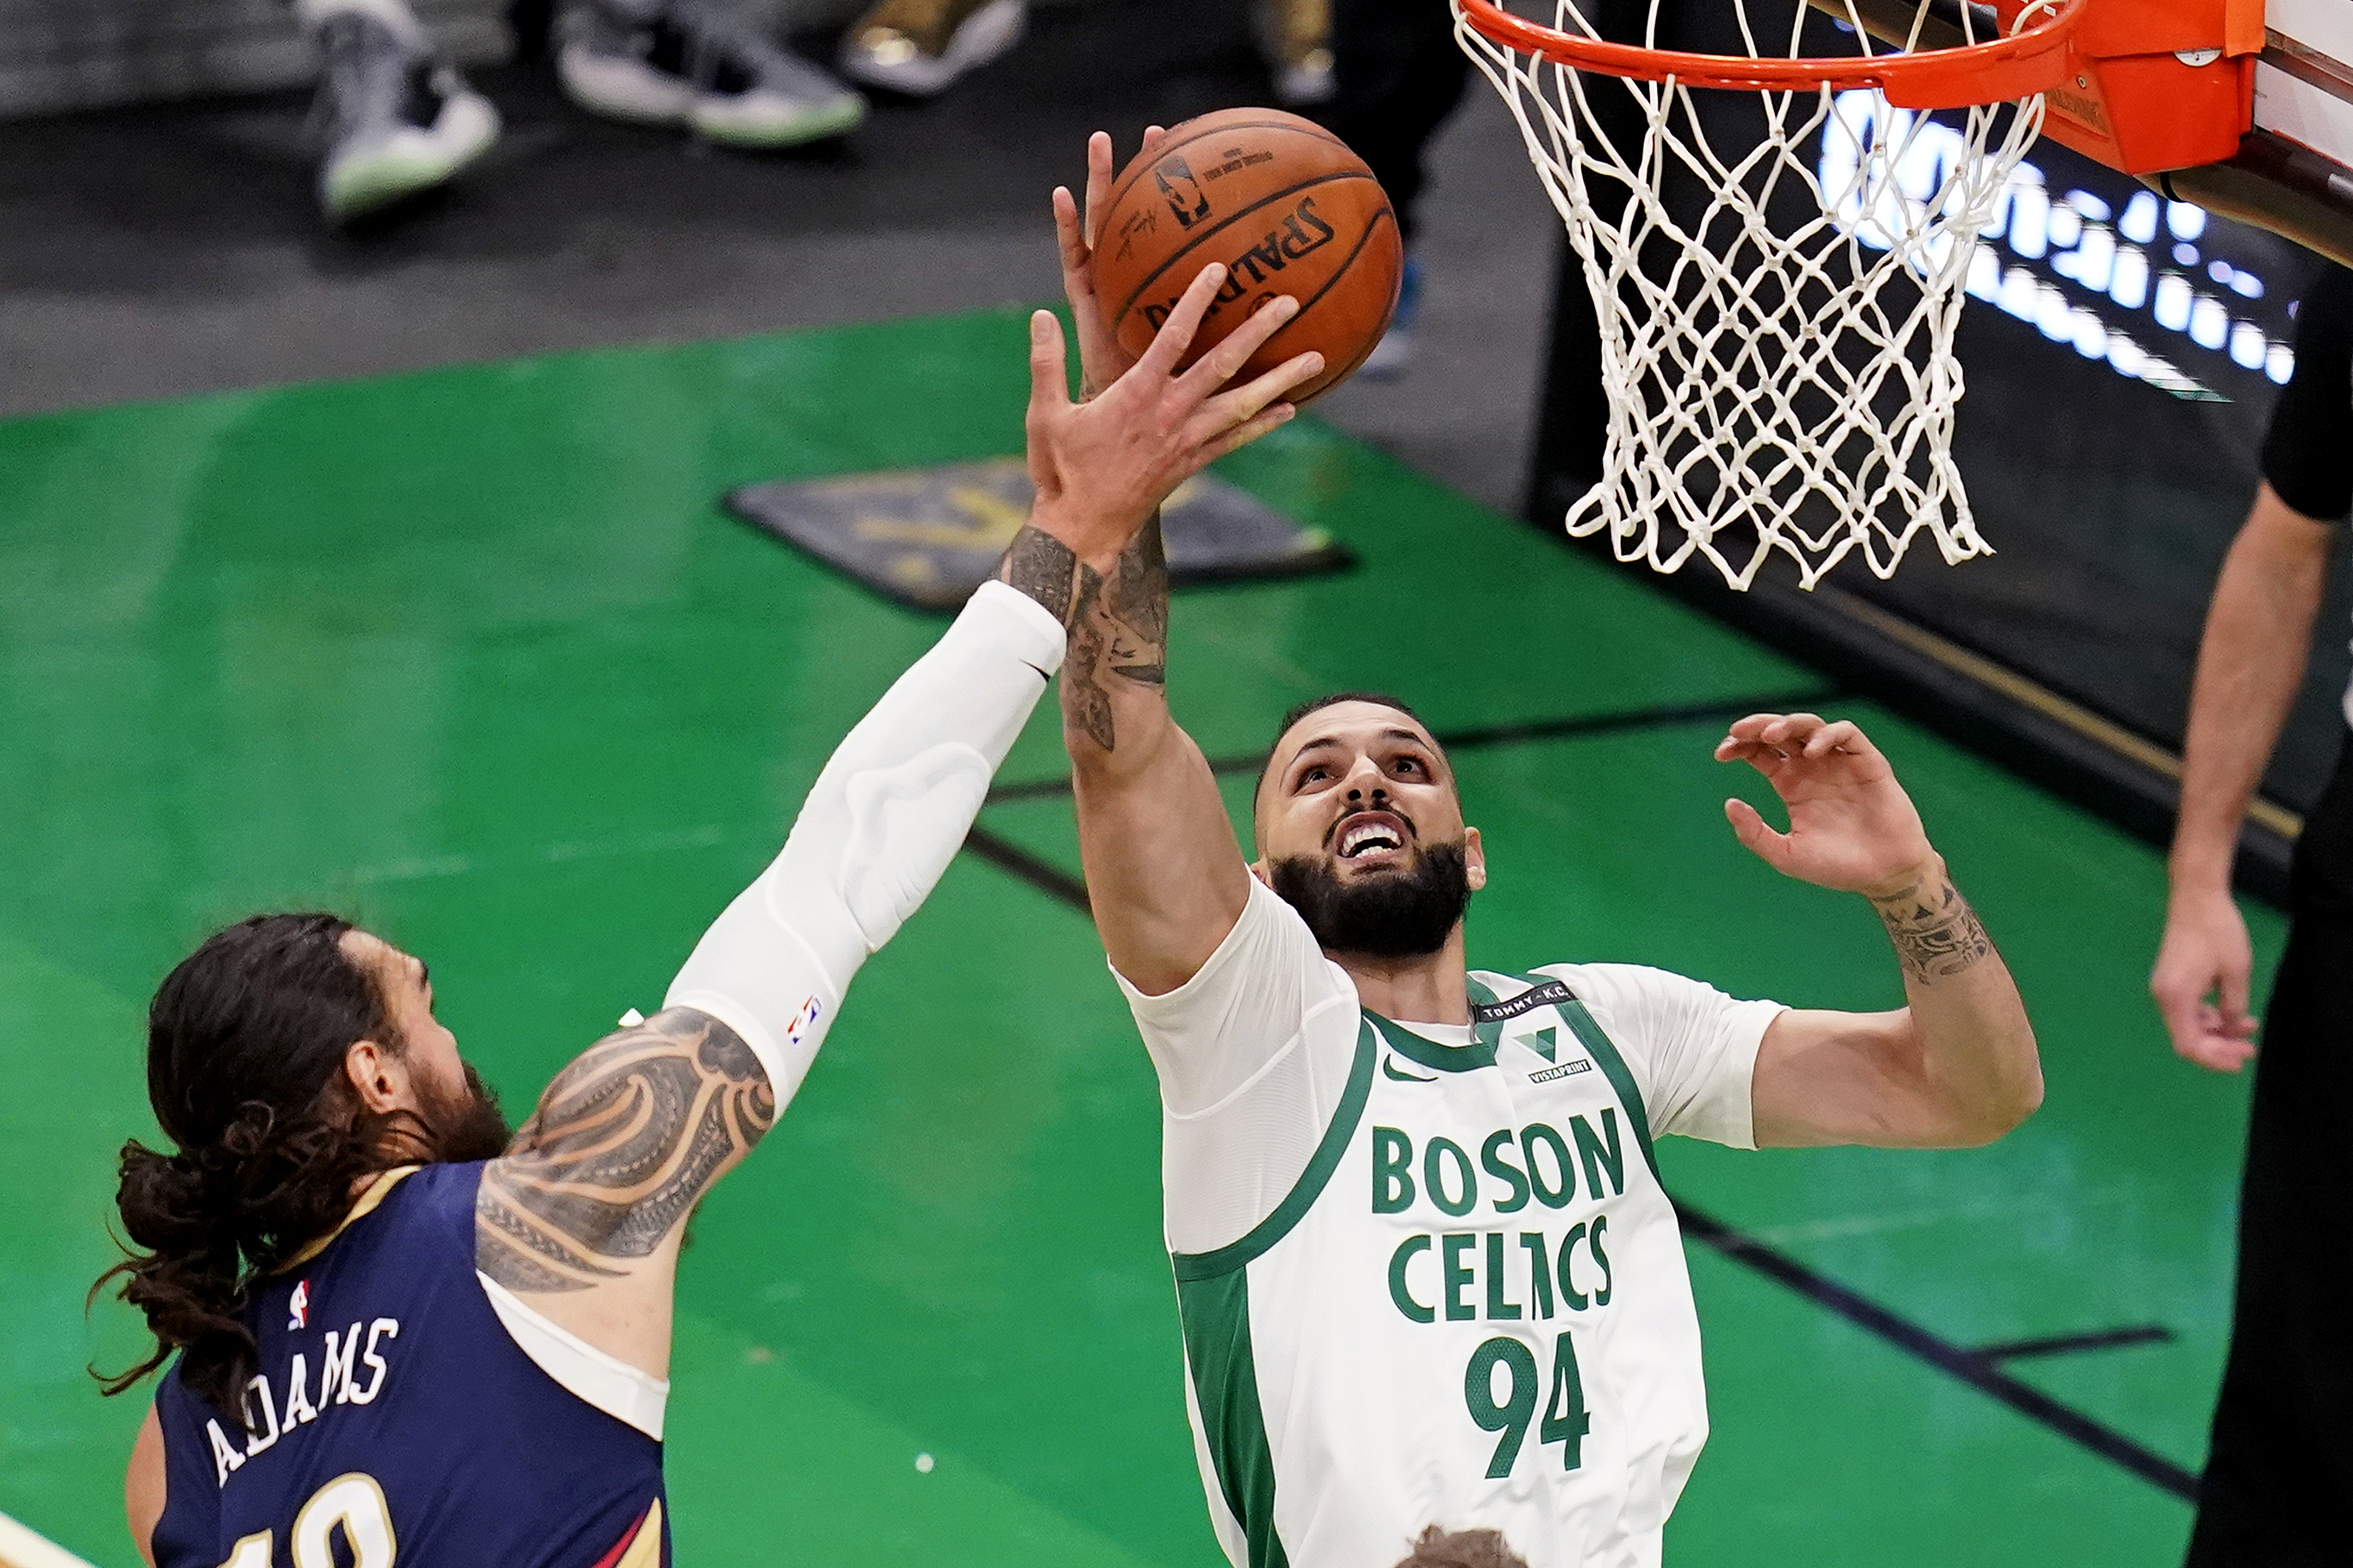 Evan Fournier shows what he can add to the Celtics' offense - CelticsBlog